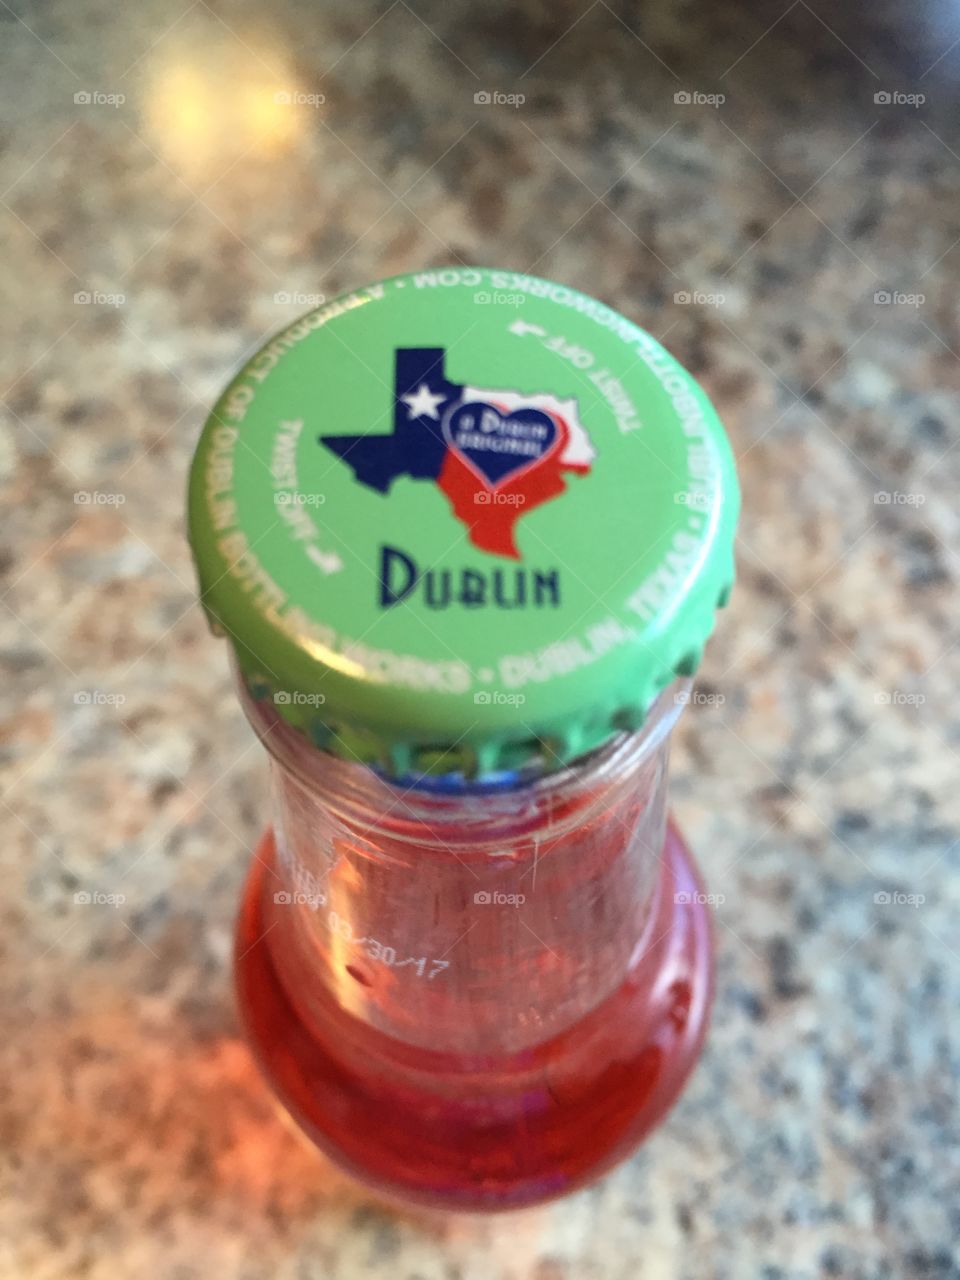 Bottle cap top of my peach flavored soda I got at Burg's Corner in Stonewall, Texas.